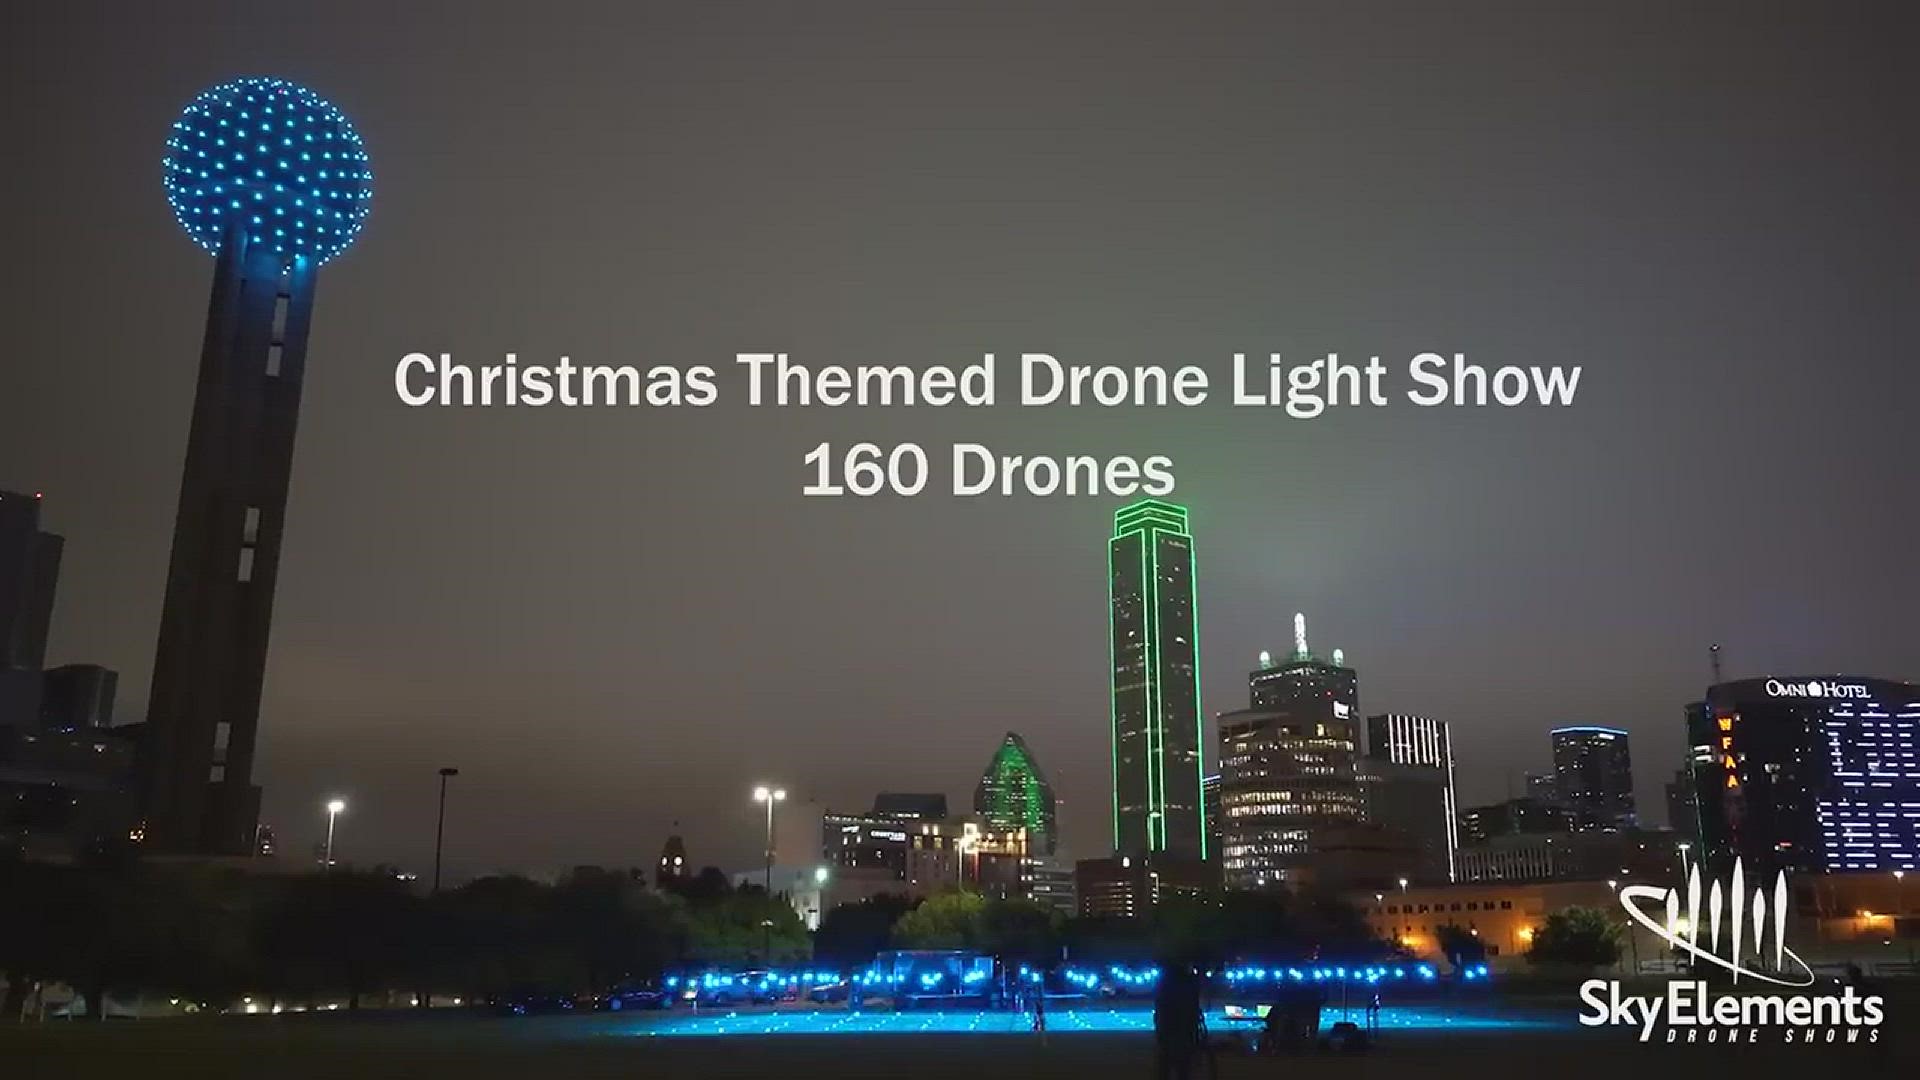 SkyElements Holiday Drone Show Dallas